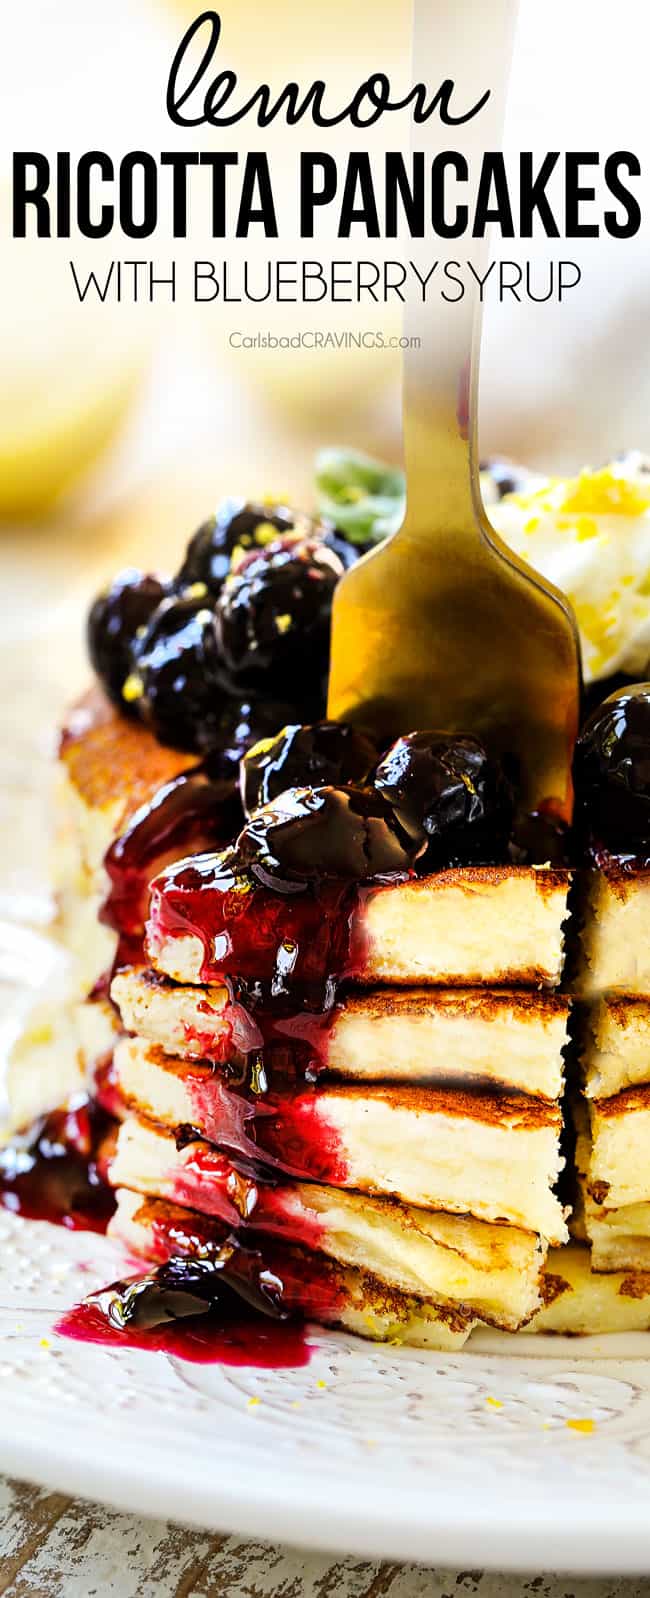 showing how to serve lemon ricotta pancakes by topping with blueberry sauce